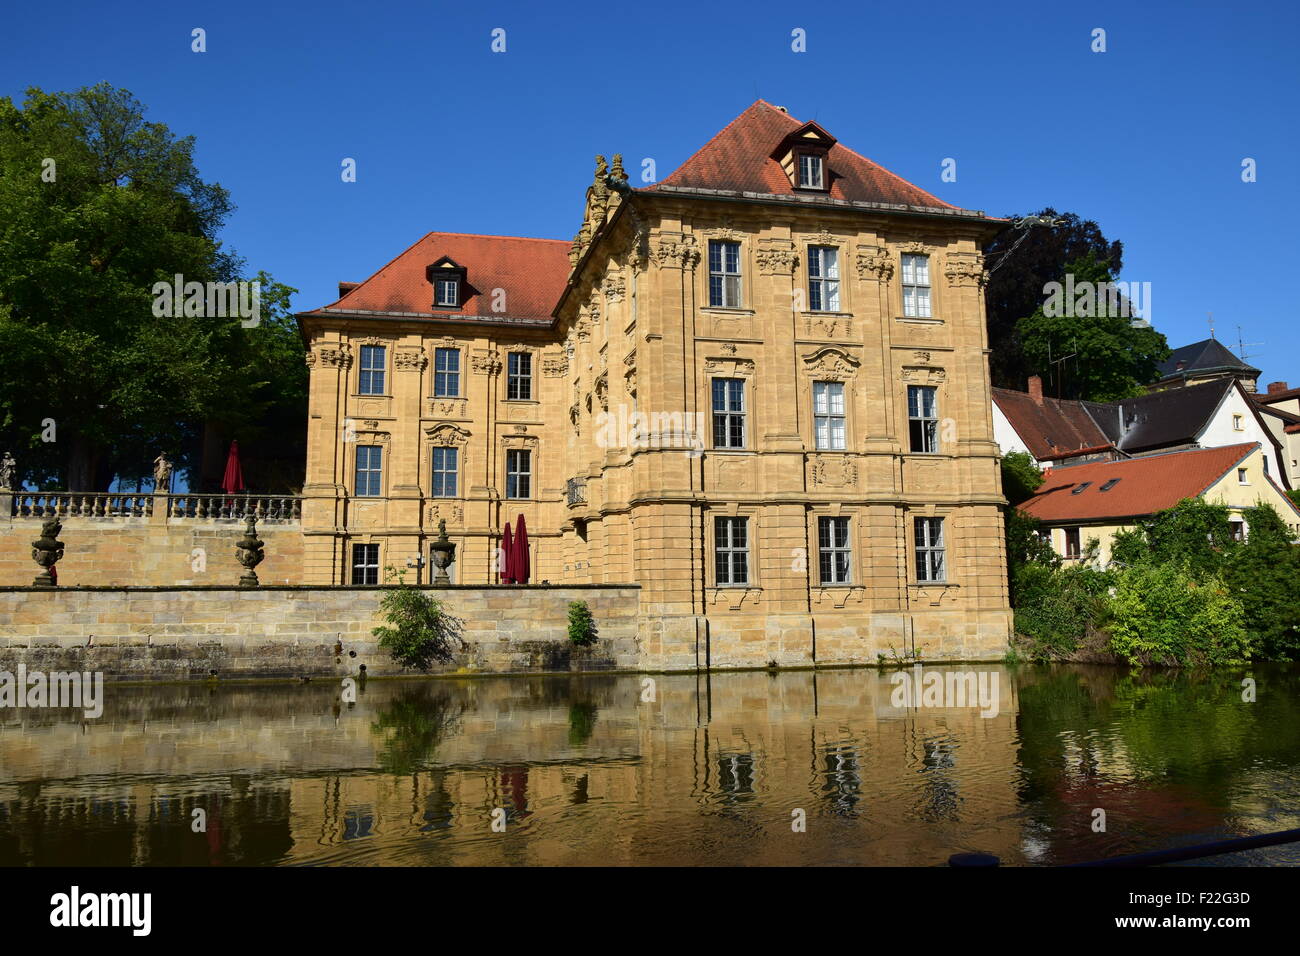 Alamy photography stock - - Page 11 germany images Villa and hi-res